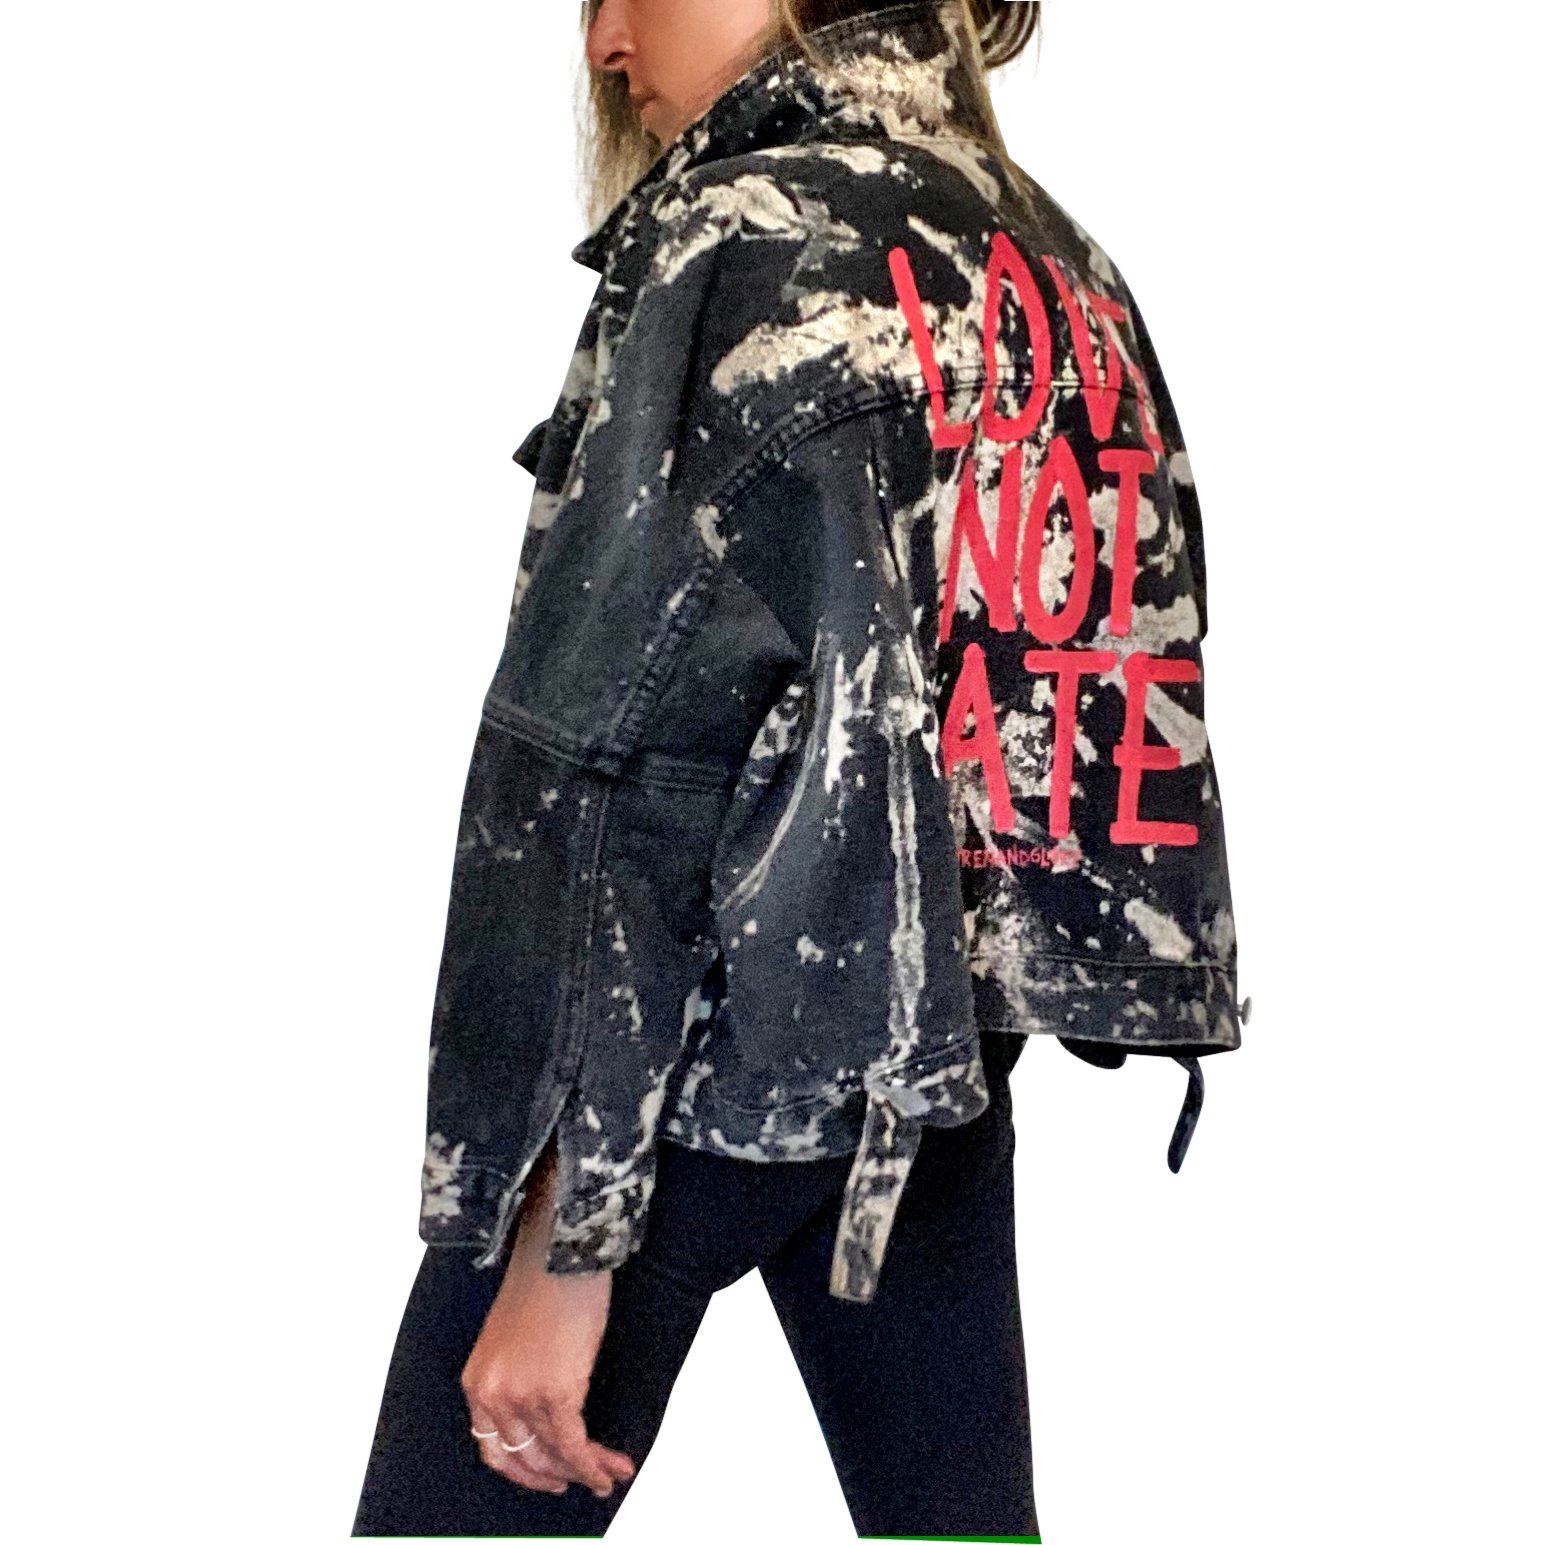 Black denim jacket. Reverse tie dye pattern throughout jacket. LOVE NOT HATE painted in red on back. Signed @wrenandglory